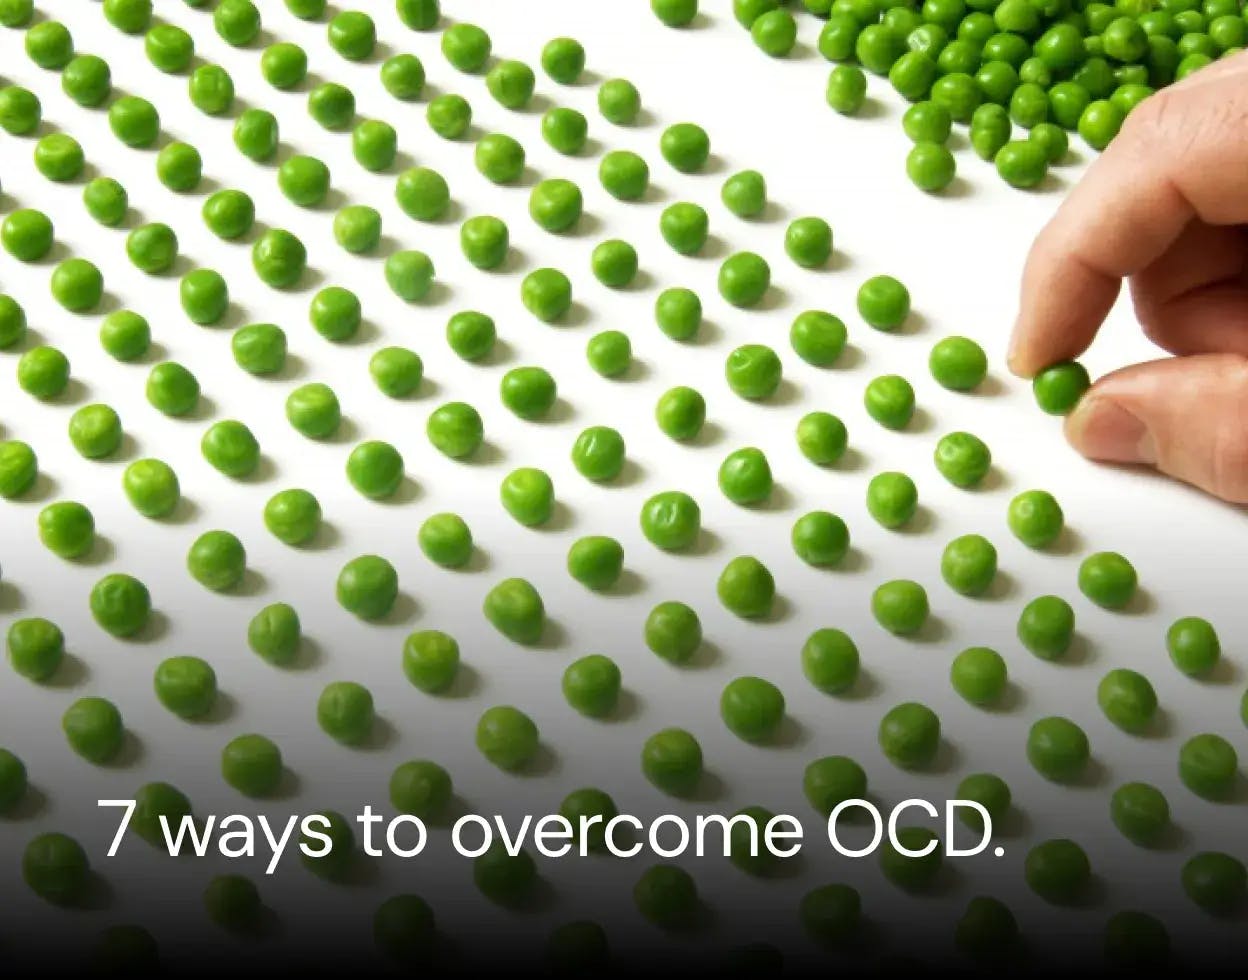 know how to overcome ocd